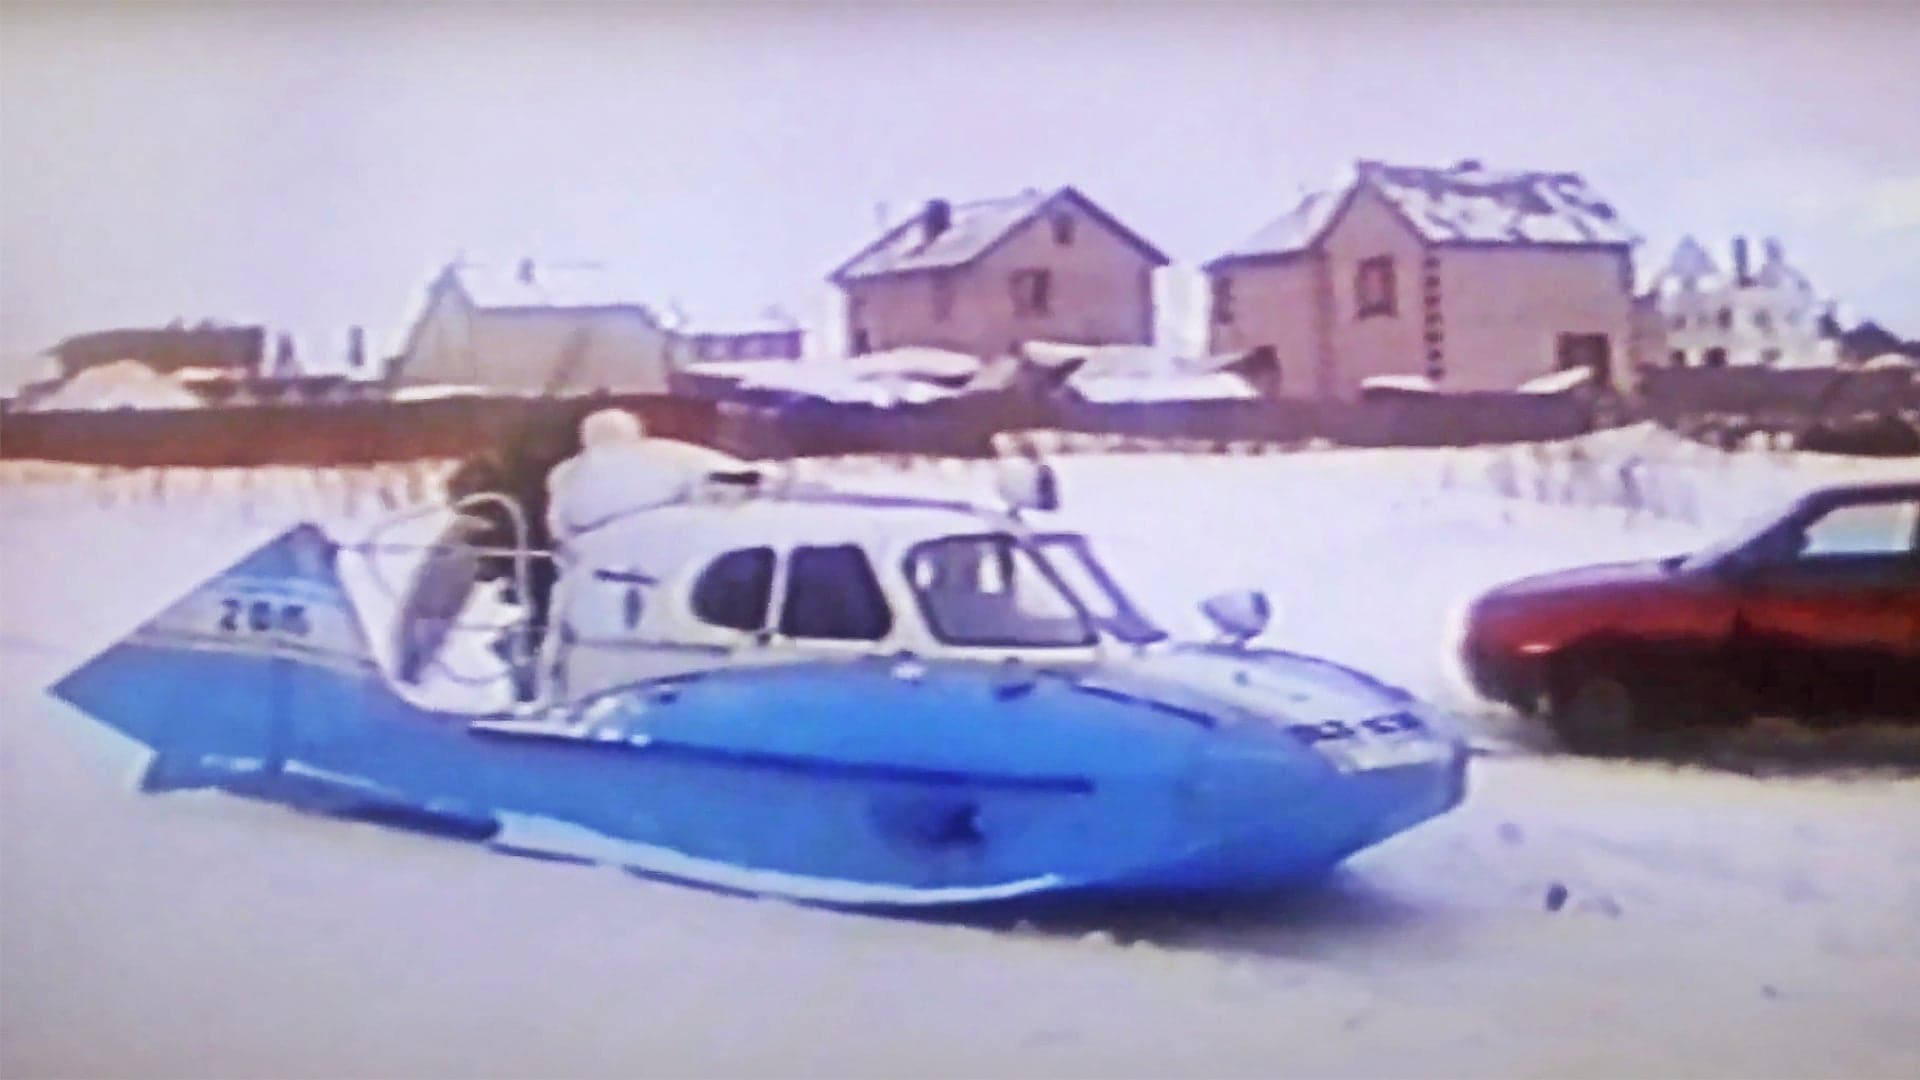 Winter Beaters Don’t Get Better Than the Tupolev A-3 Aerosledge, Russia’s Aircraft-Powered Snow Machine